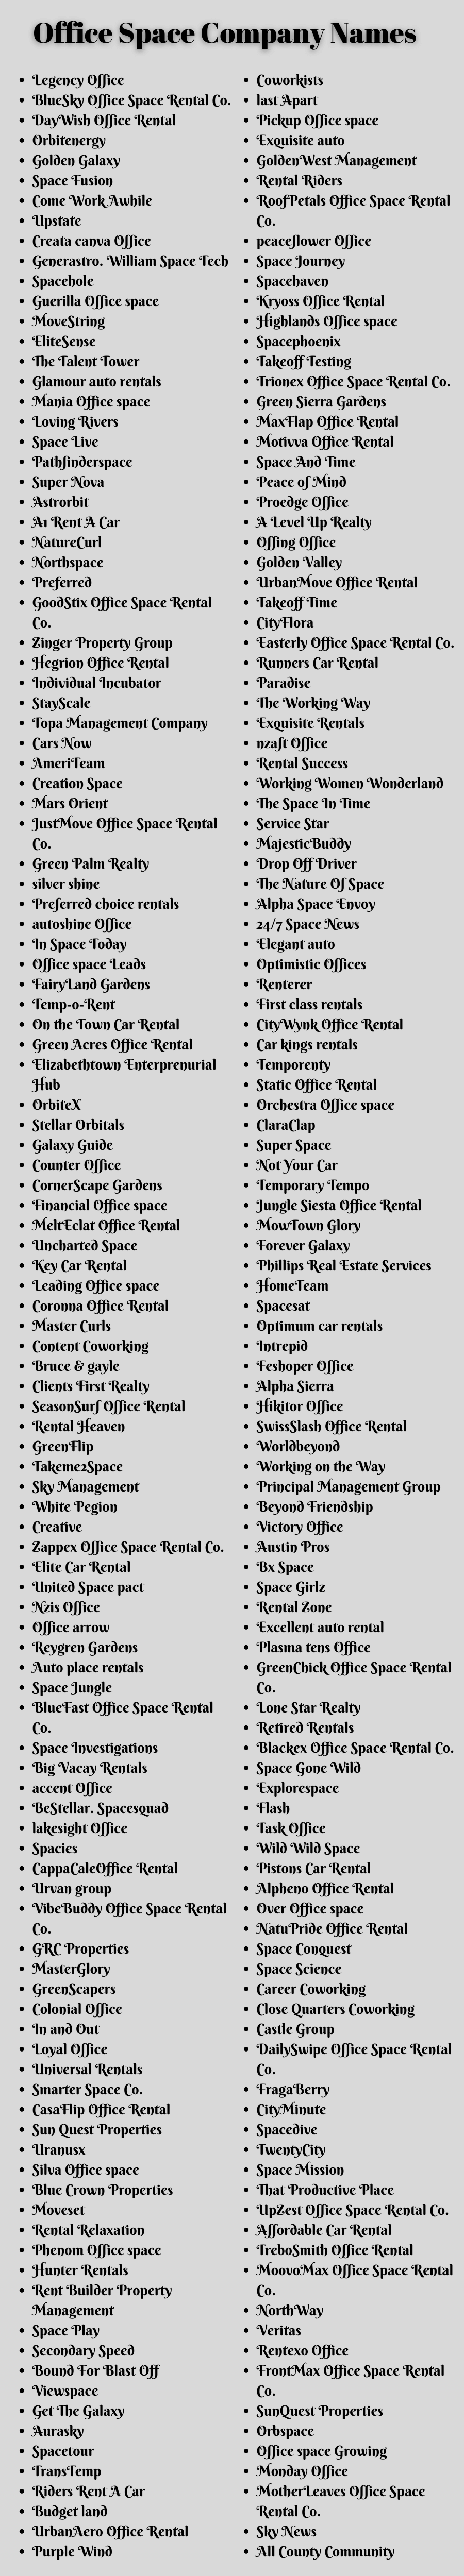 Office Space Company Names